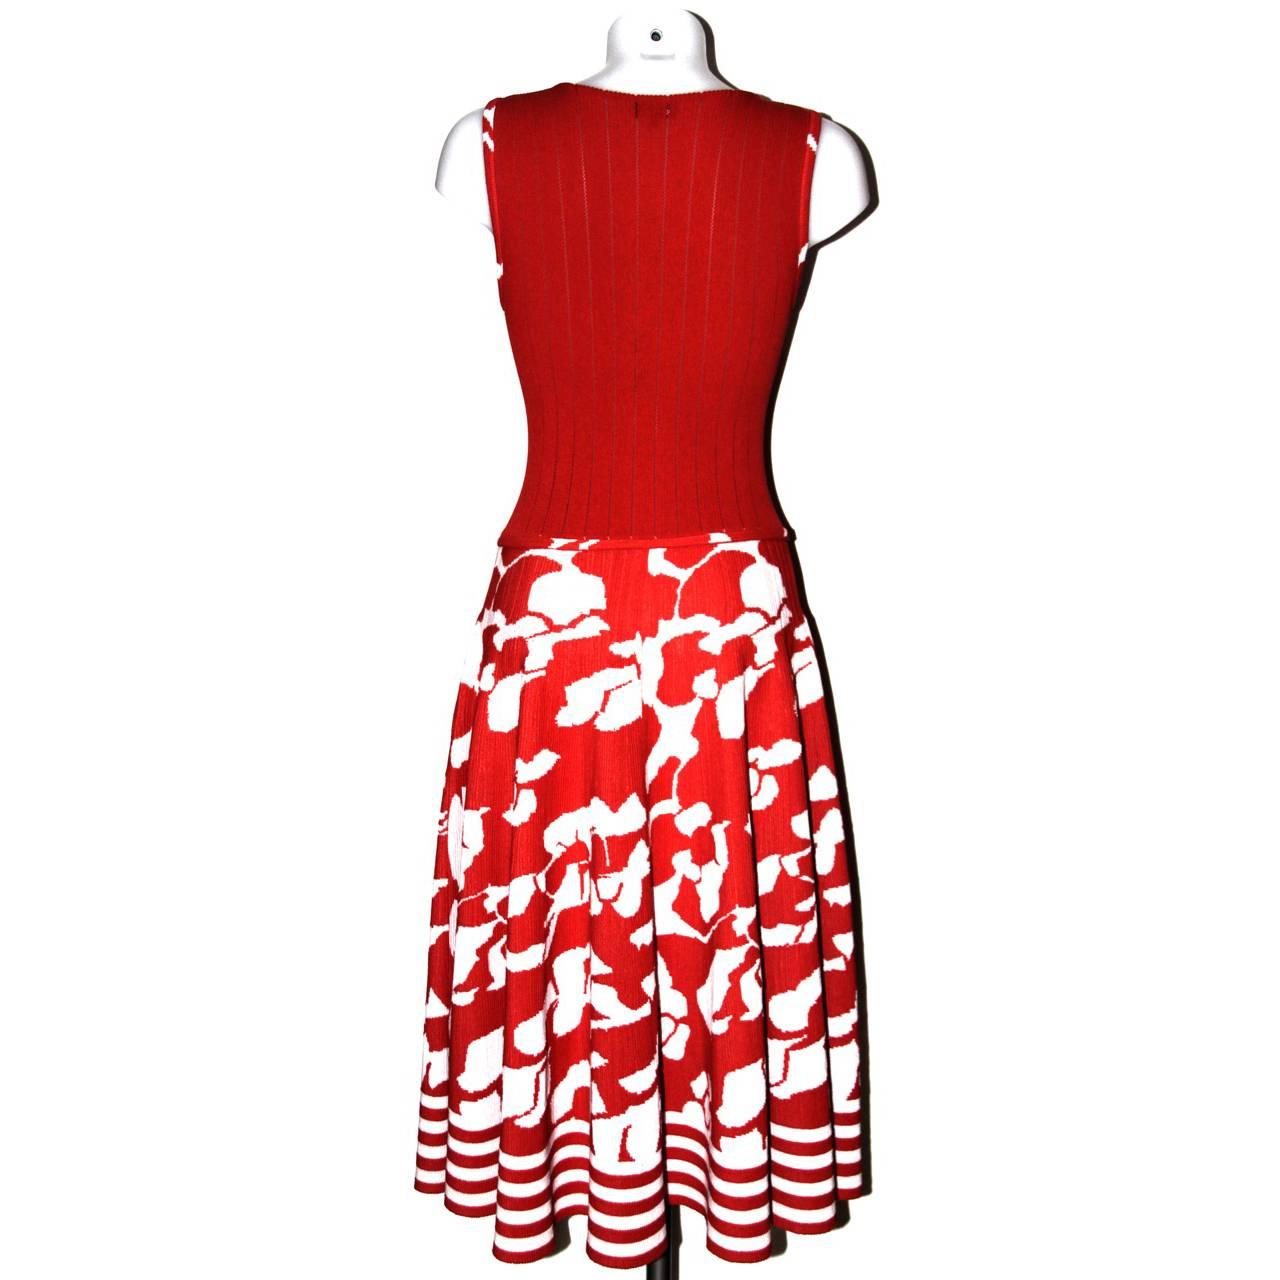 Magnificent sleeveless A-line Chanel dress. 
Crafted of cotton (82%) and polyamide-nylon (18%). It features a front zip fastening closures and two skirt pockets. 

Condition: Excellent condition  
Color: Red and white
Collection: